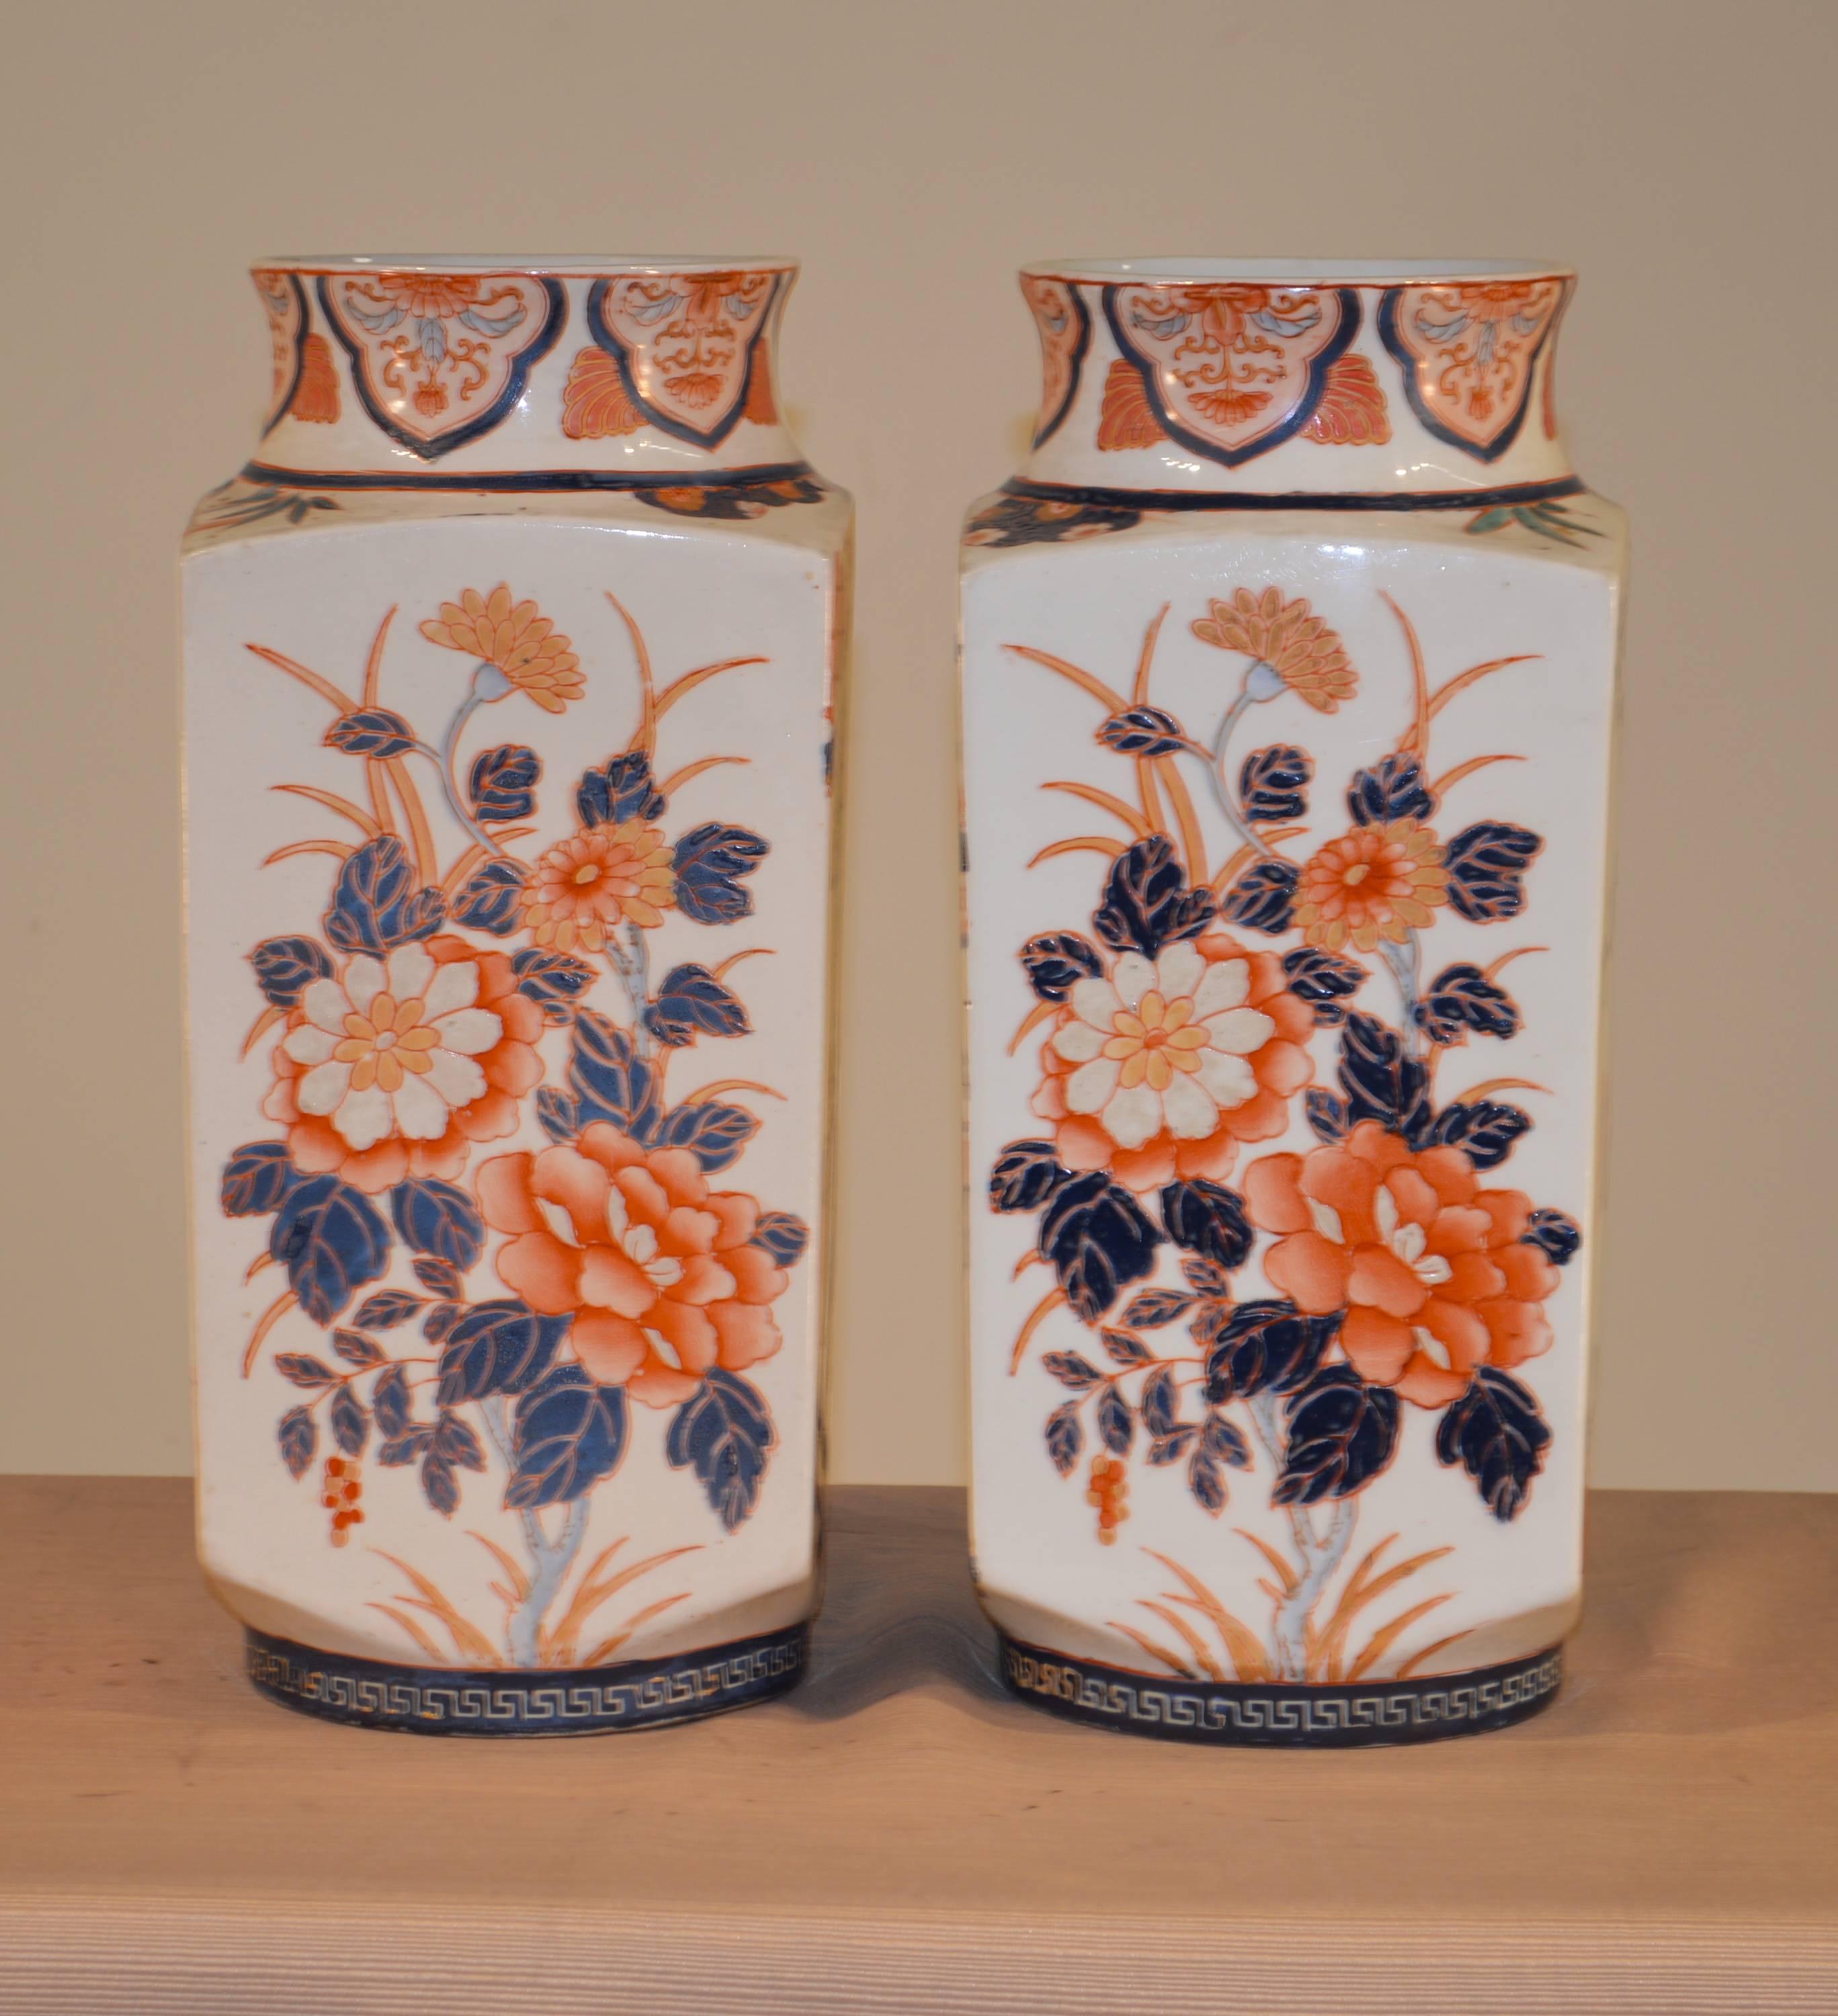 Pair of mid-20th century, English vases with hand-painted enamel bird and flower decoration. No maker's marks.